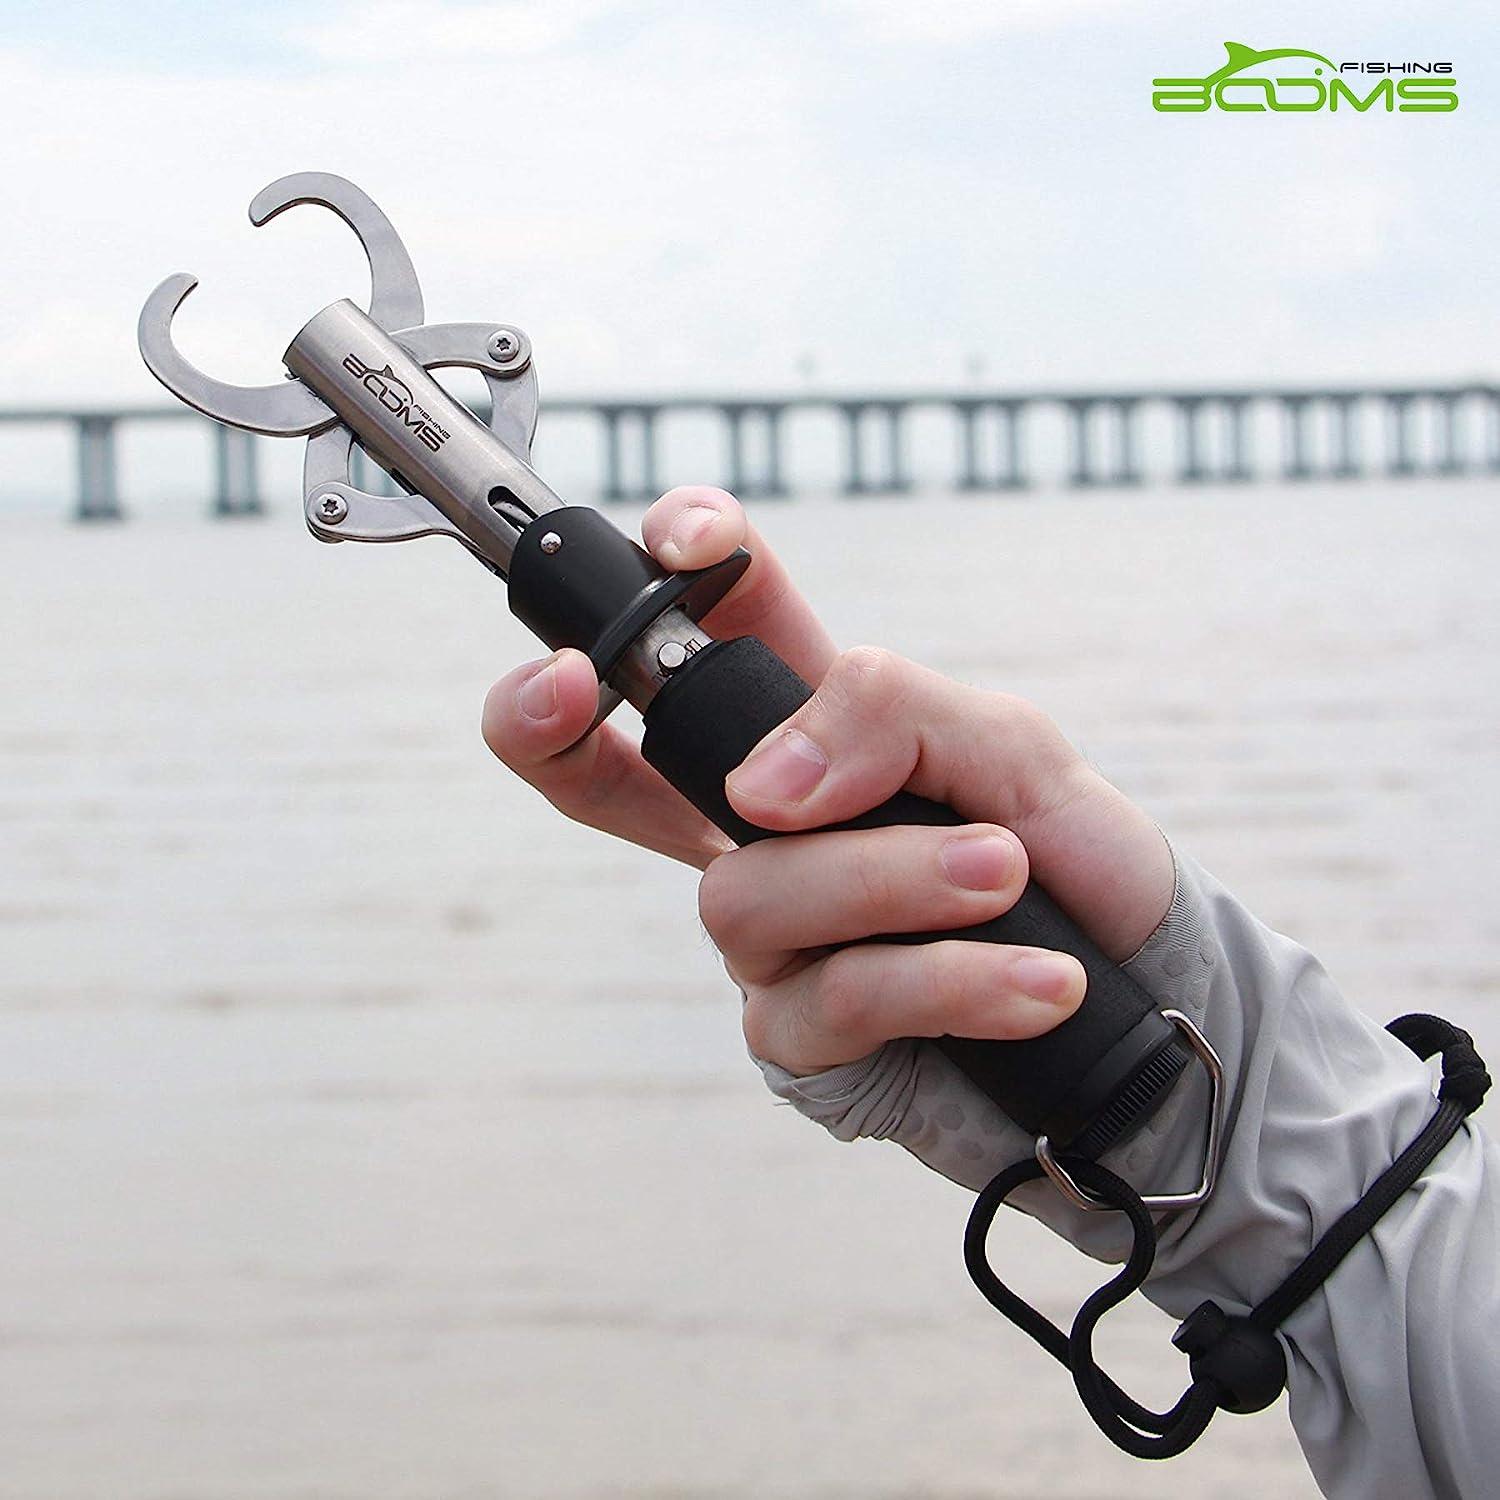 Booms fishing G1 Fish Gripper Grip and Hold Fish with Tight Grip